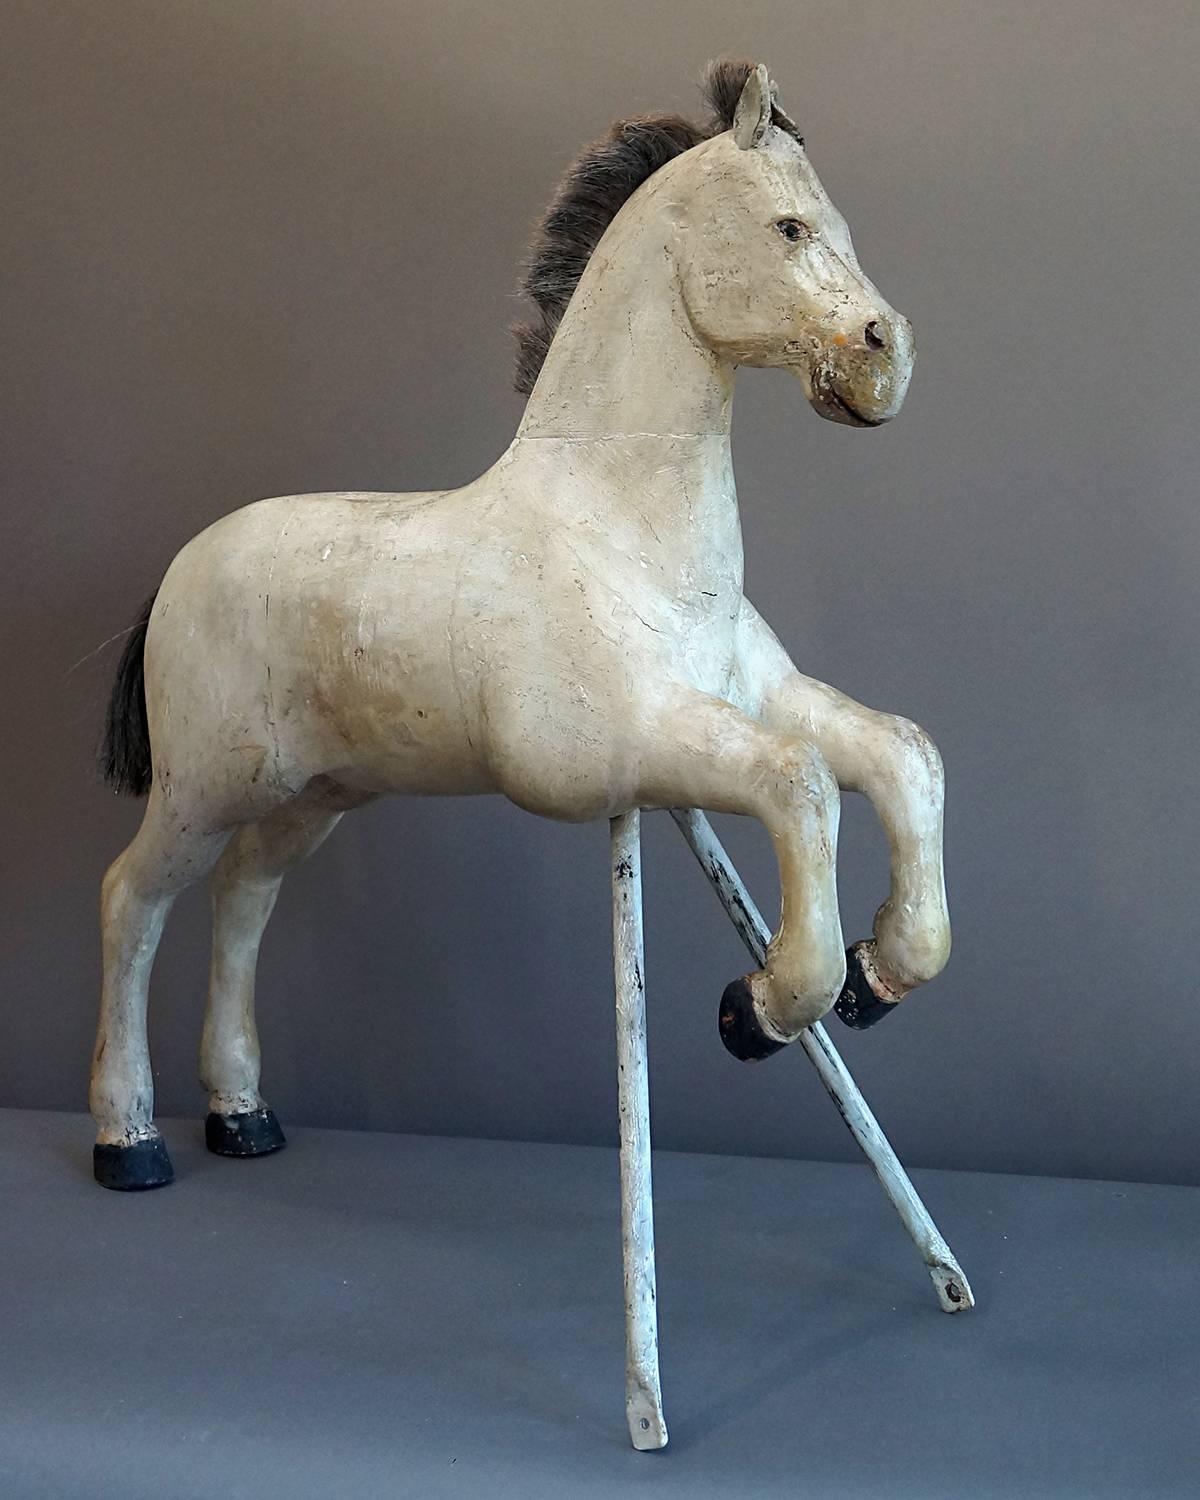 Carved Swedish horse, circa 1910, in a prancing pose and supported by a metal stand. Cropped horsehair mane and tail, leather ears, and carved feathering on the fetlocks.